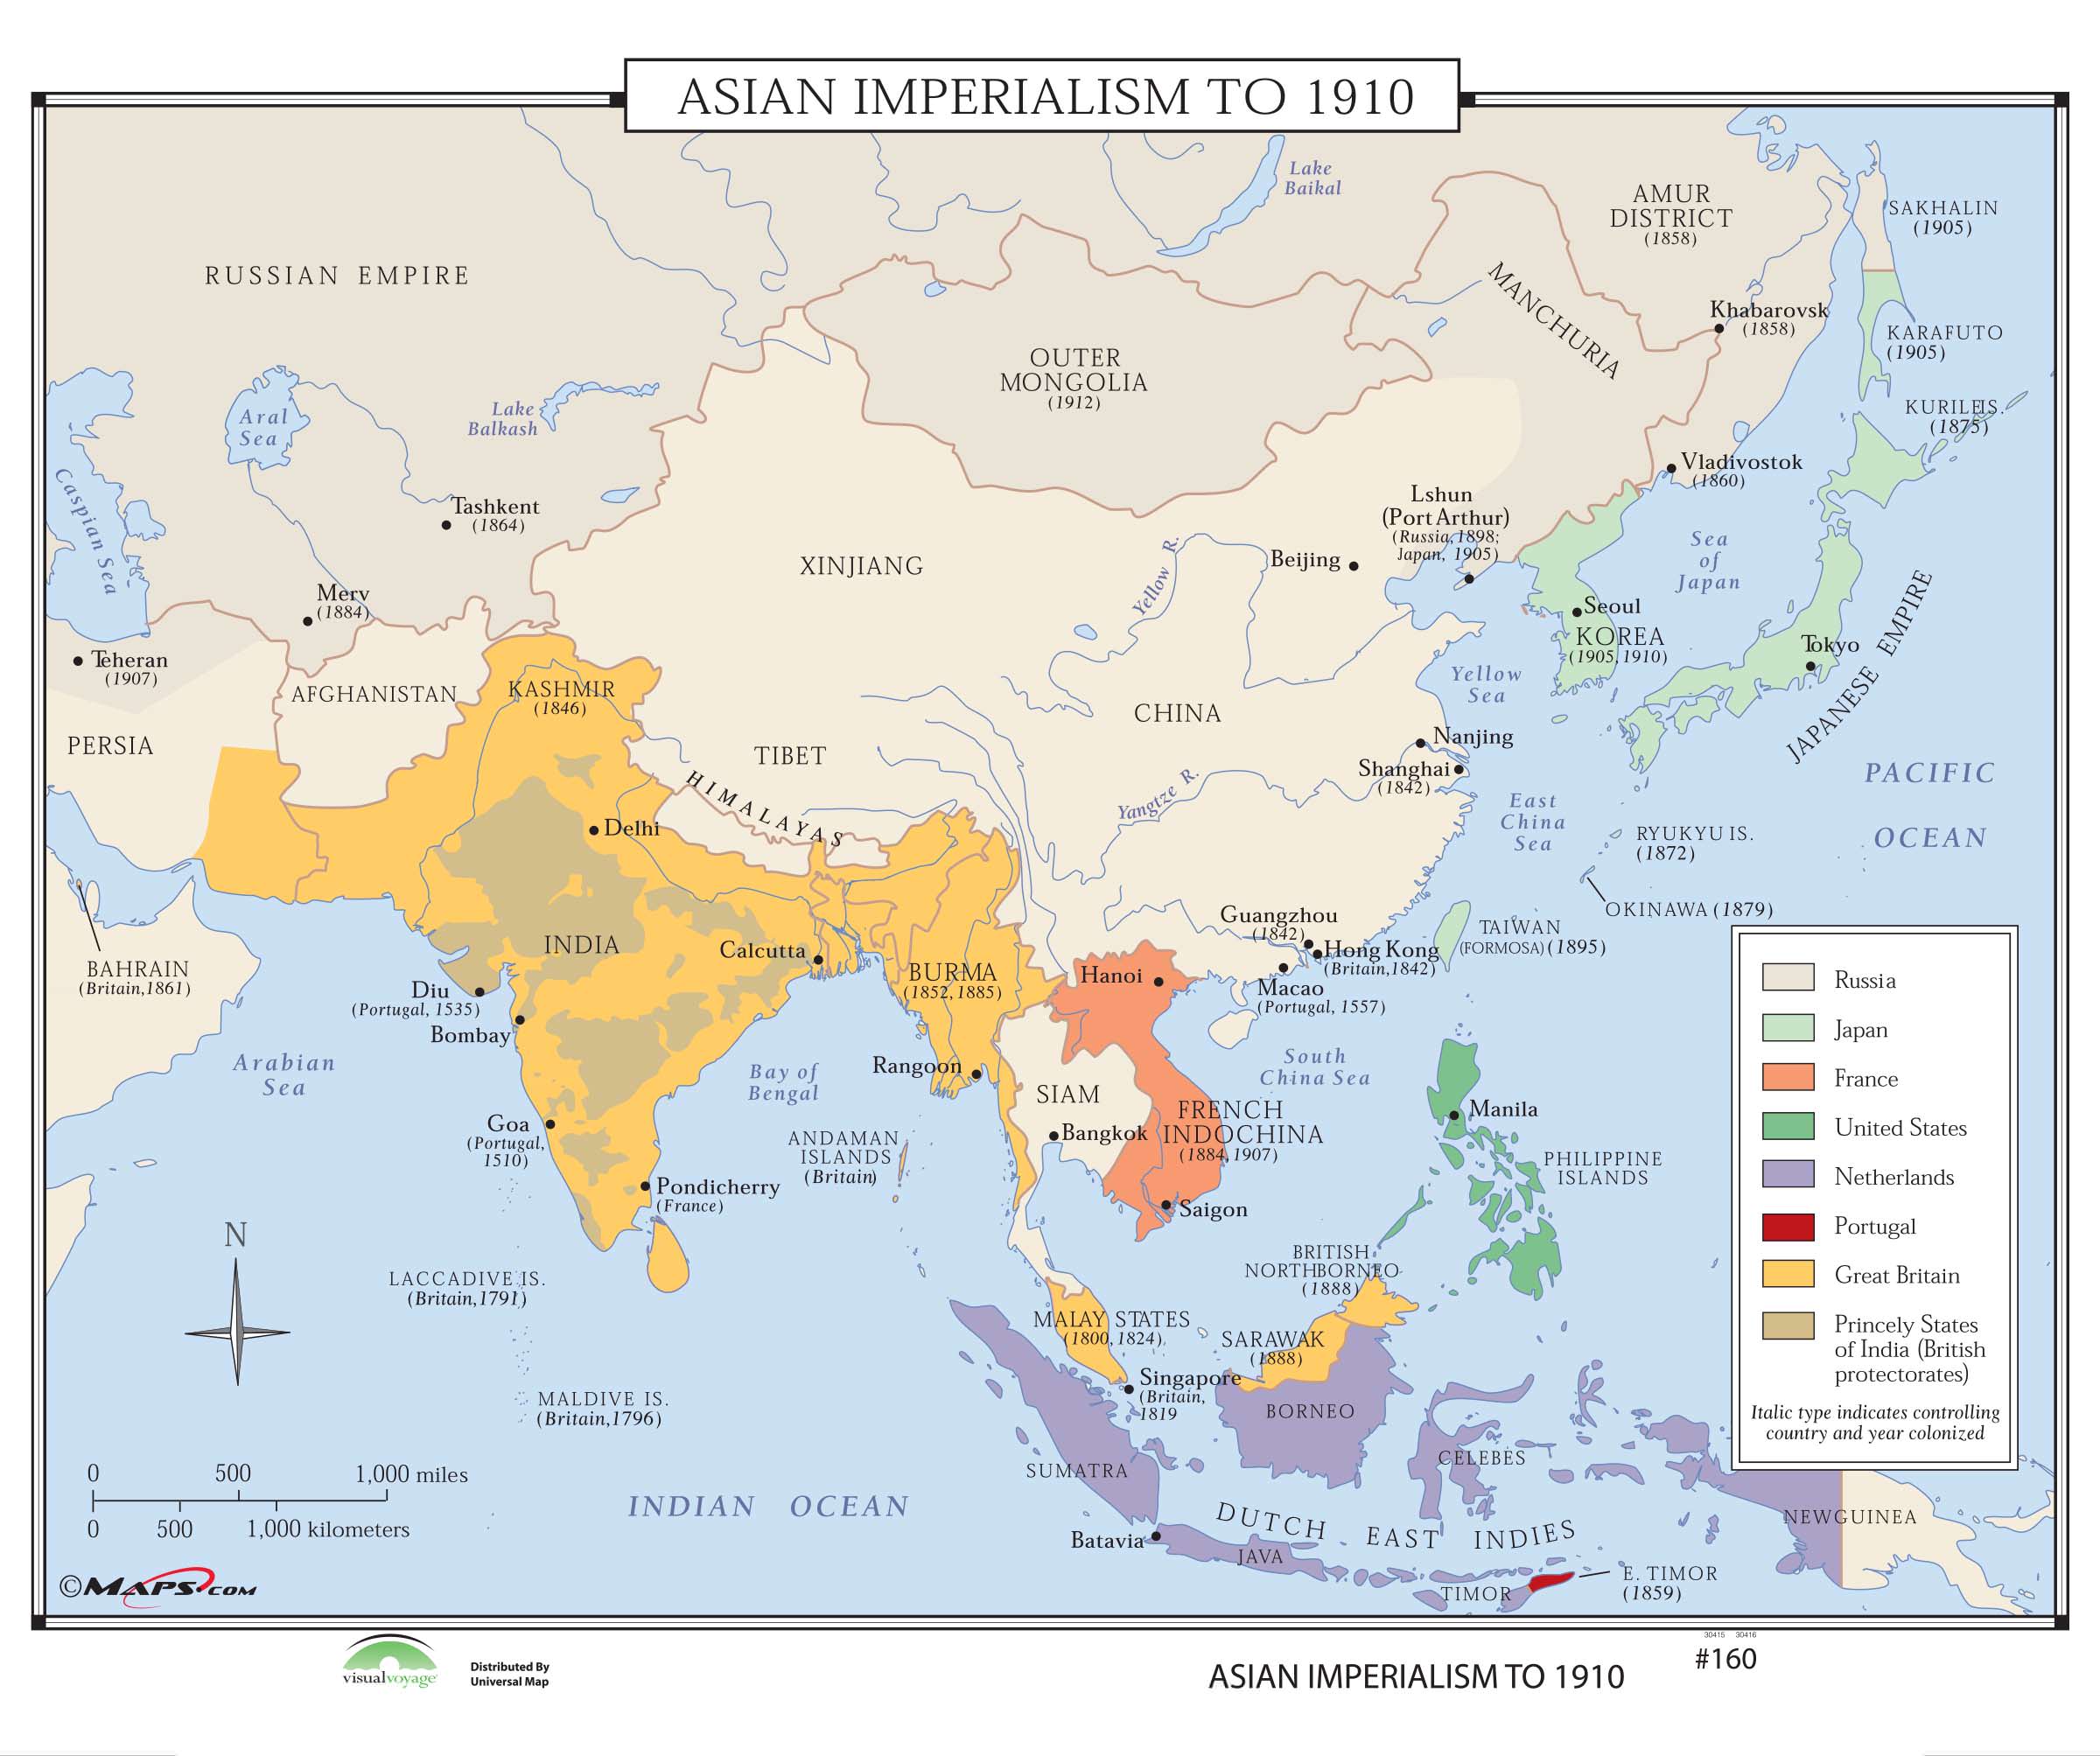 Effects of imperialism in Asia